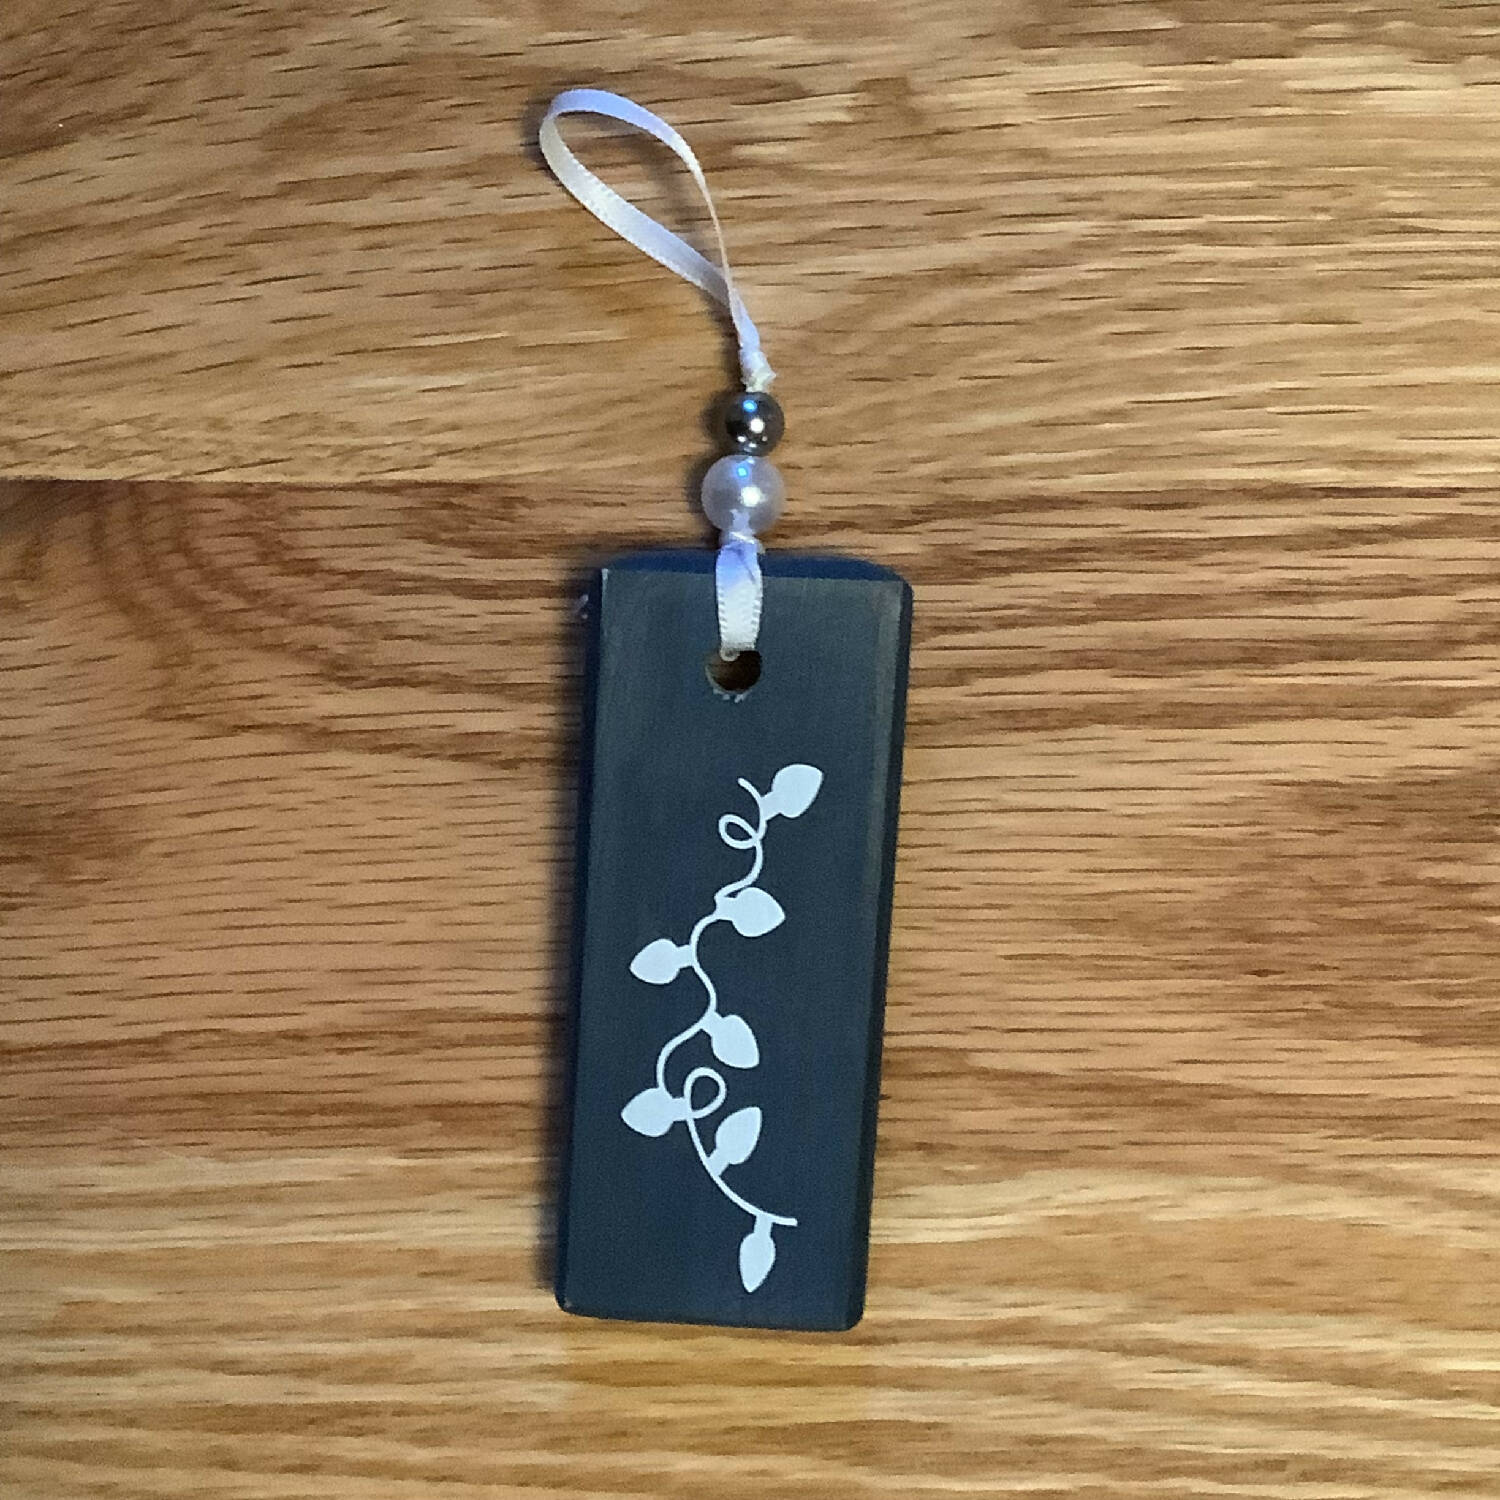 Wooden Christmas Tag - Blue “String of Lights”